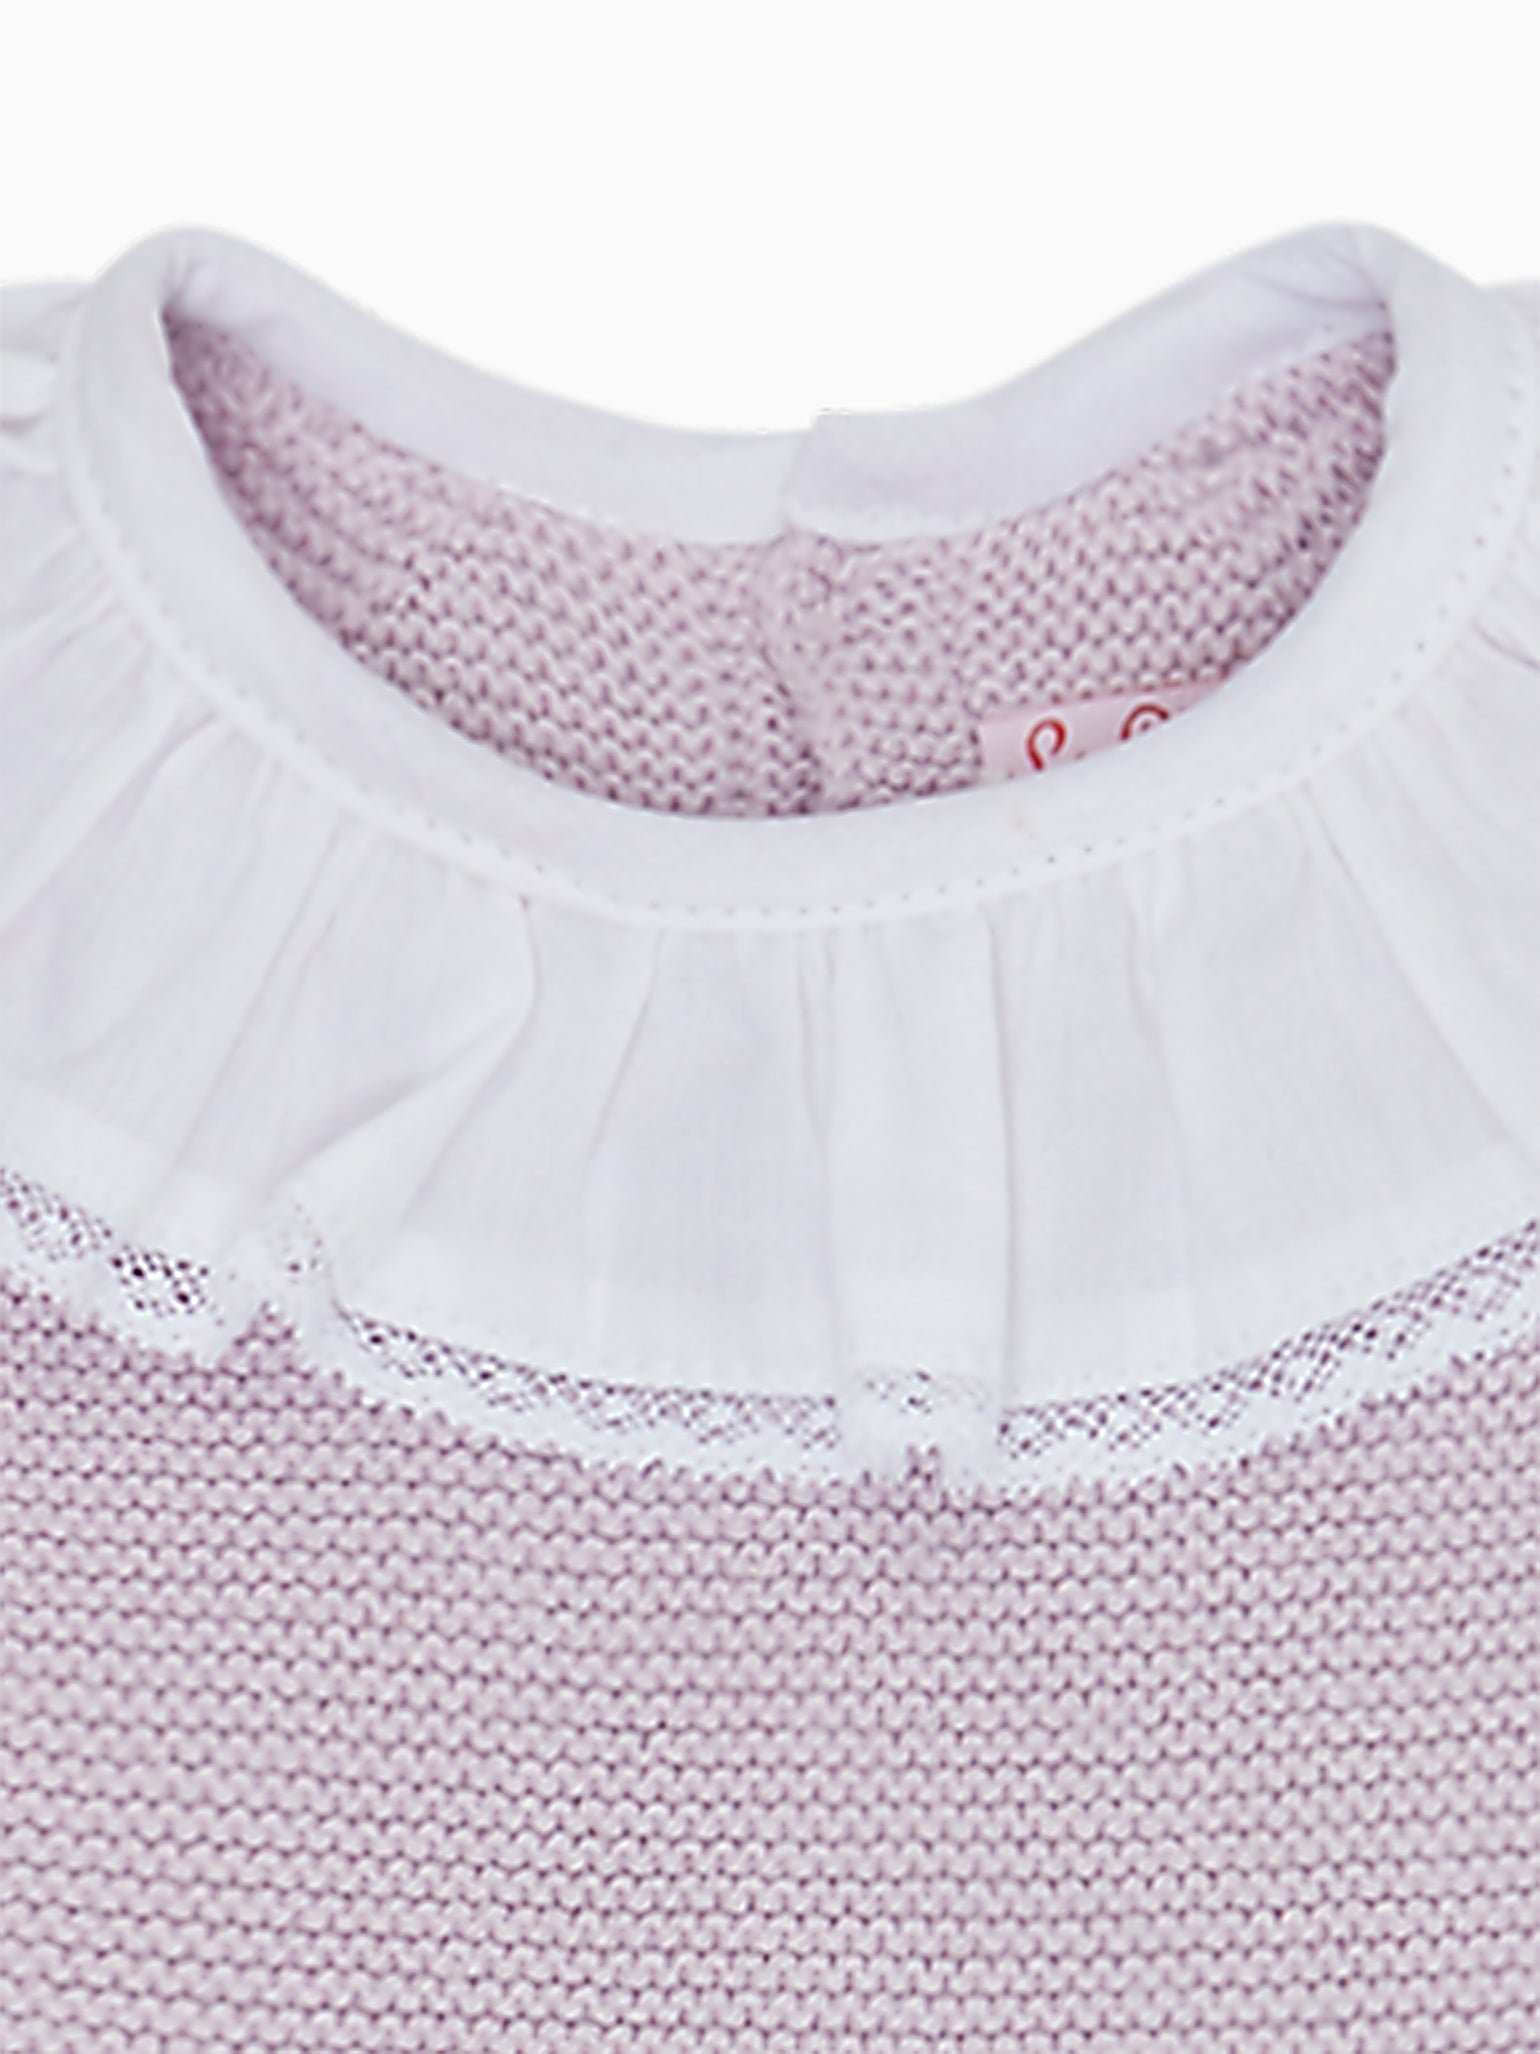 Lilac Claudeta Cotton Baby Girl Knitted Set